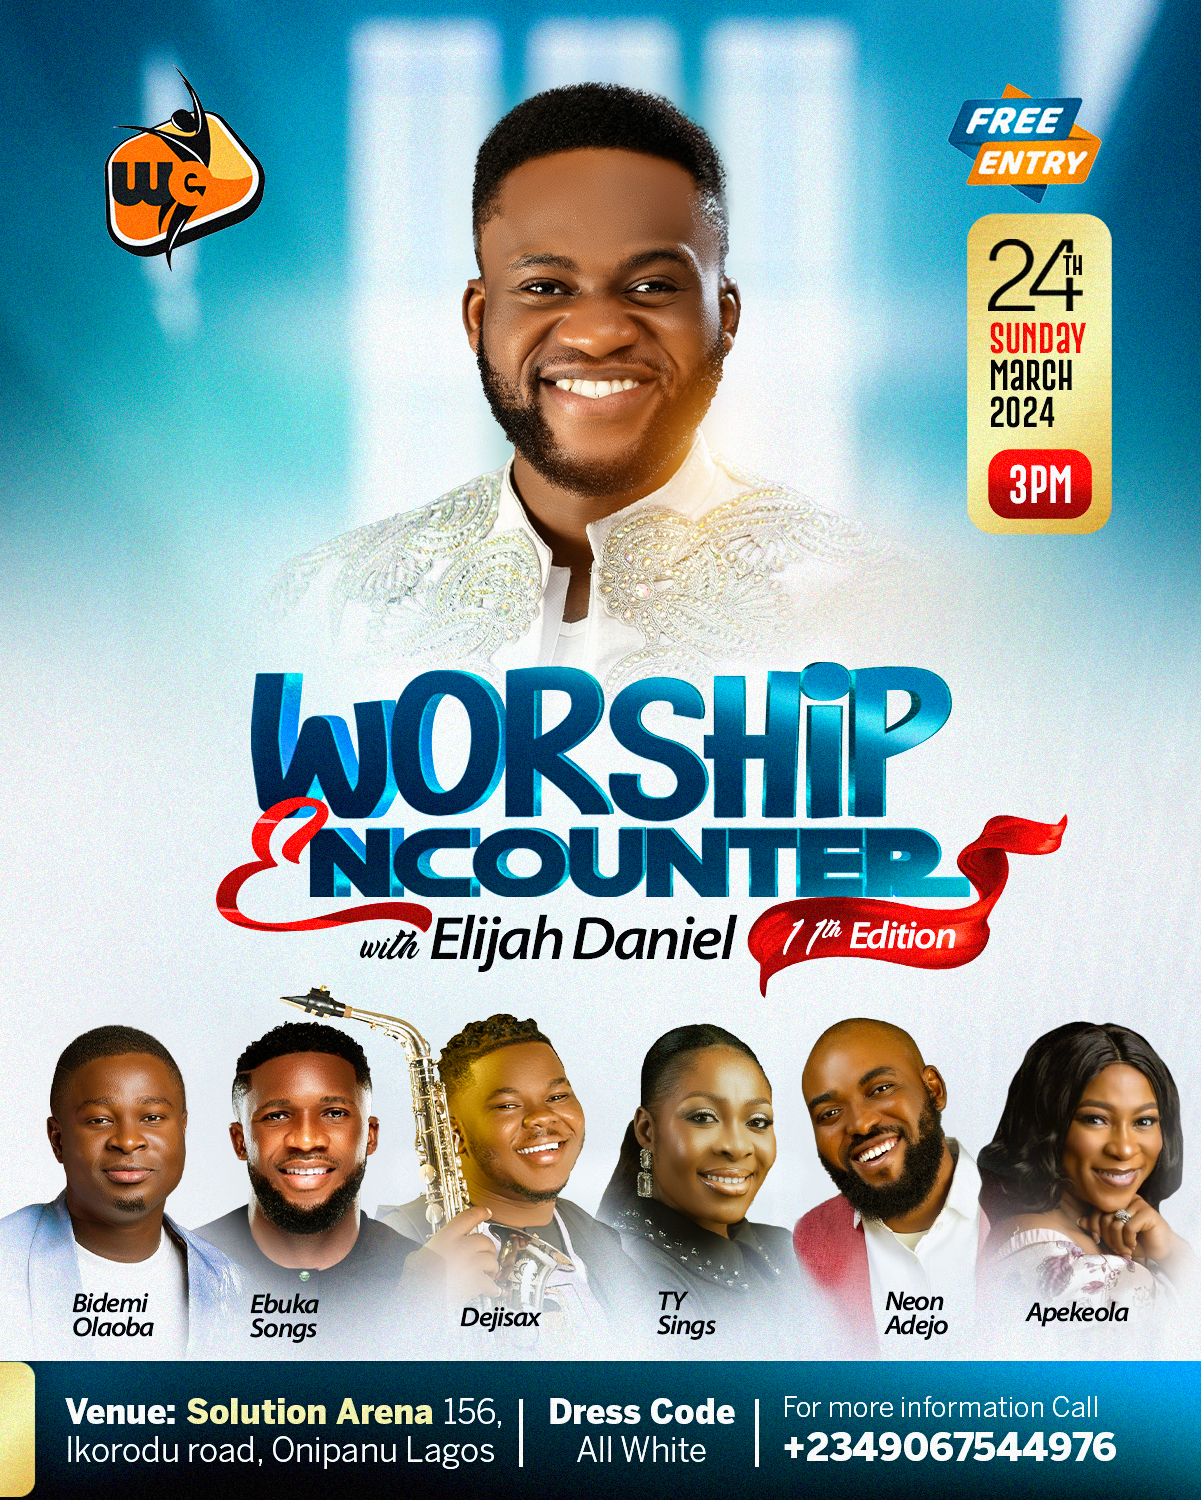 All Is Set For Elijah Daniel Worship Encounter 11th Edition featuring the likes of  Bidemi Olaoba, Neon Adejo,, Ebuka songs & others